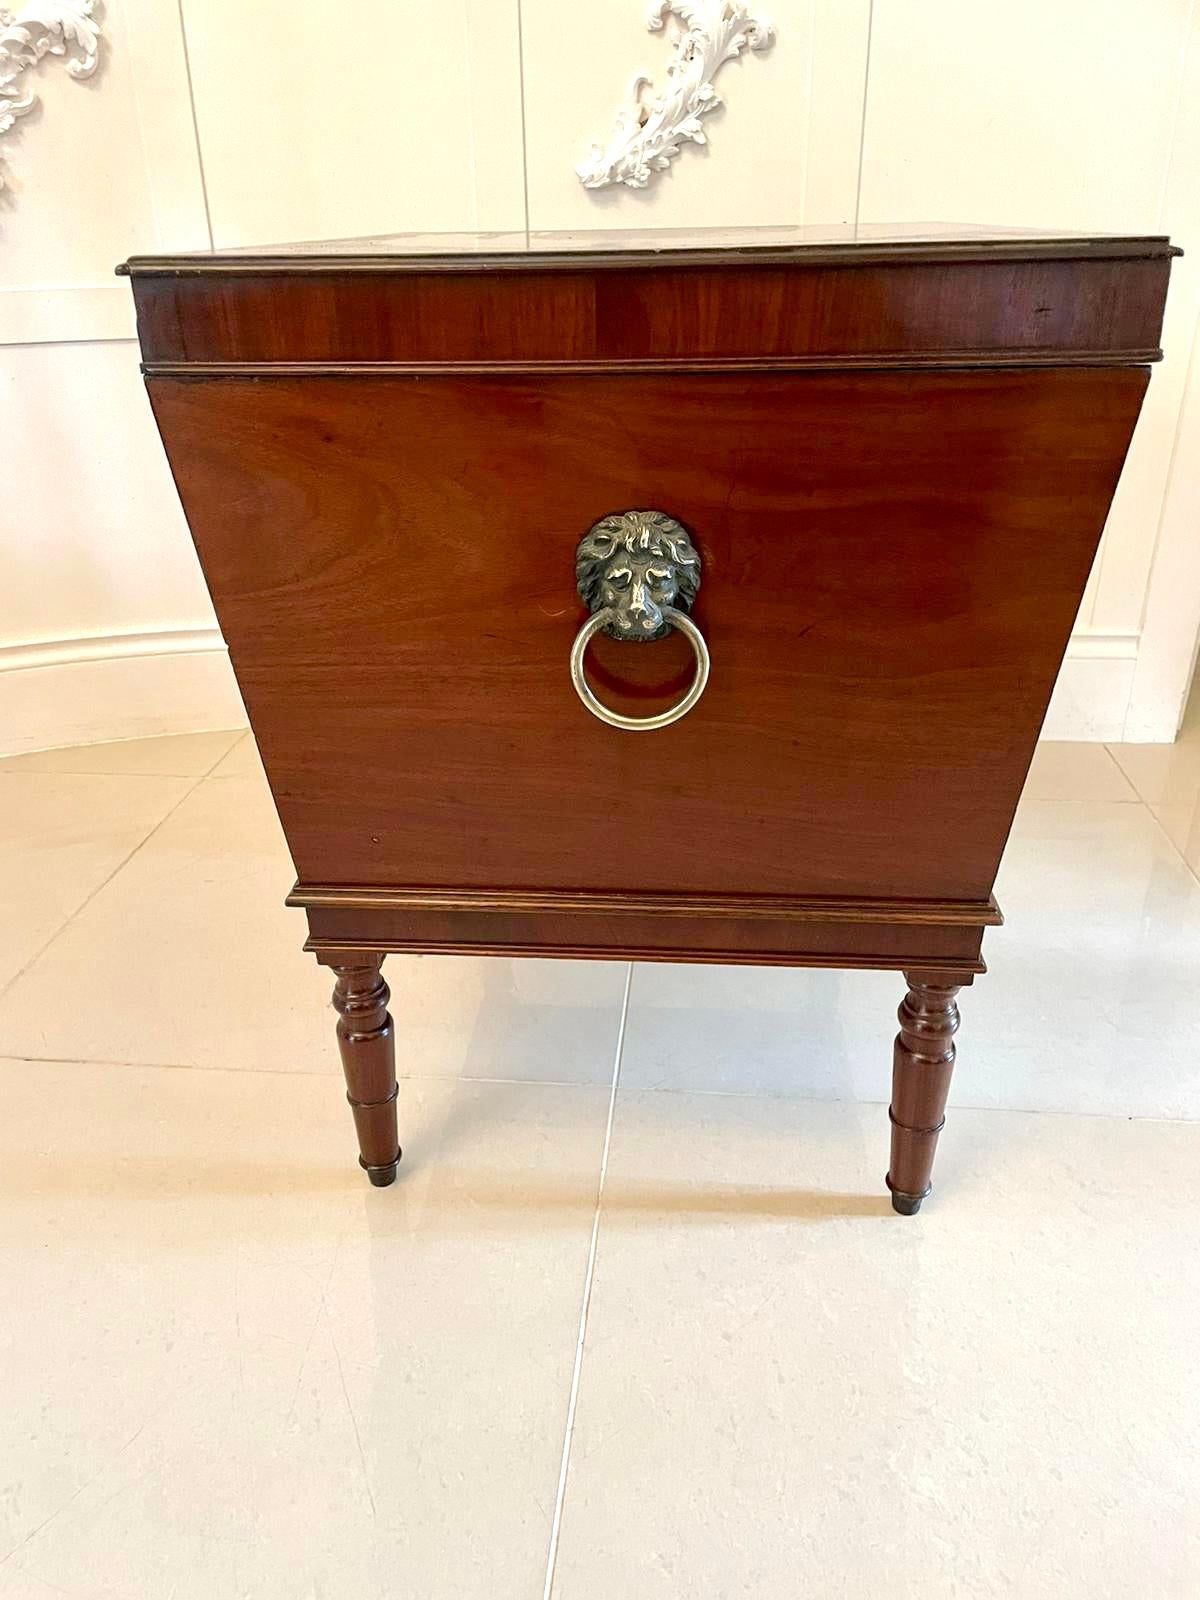 Large George III antique mahogany cellarette/wine cooler having a splendid quality mahogany lift up top with a moulded edge opening to reveal a fitted interior, original brass lions head handles. 
A superb quality figured mahogany cellarette raised